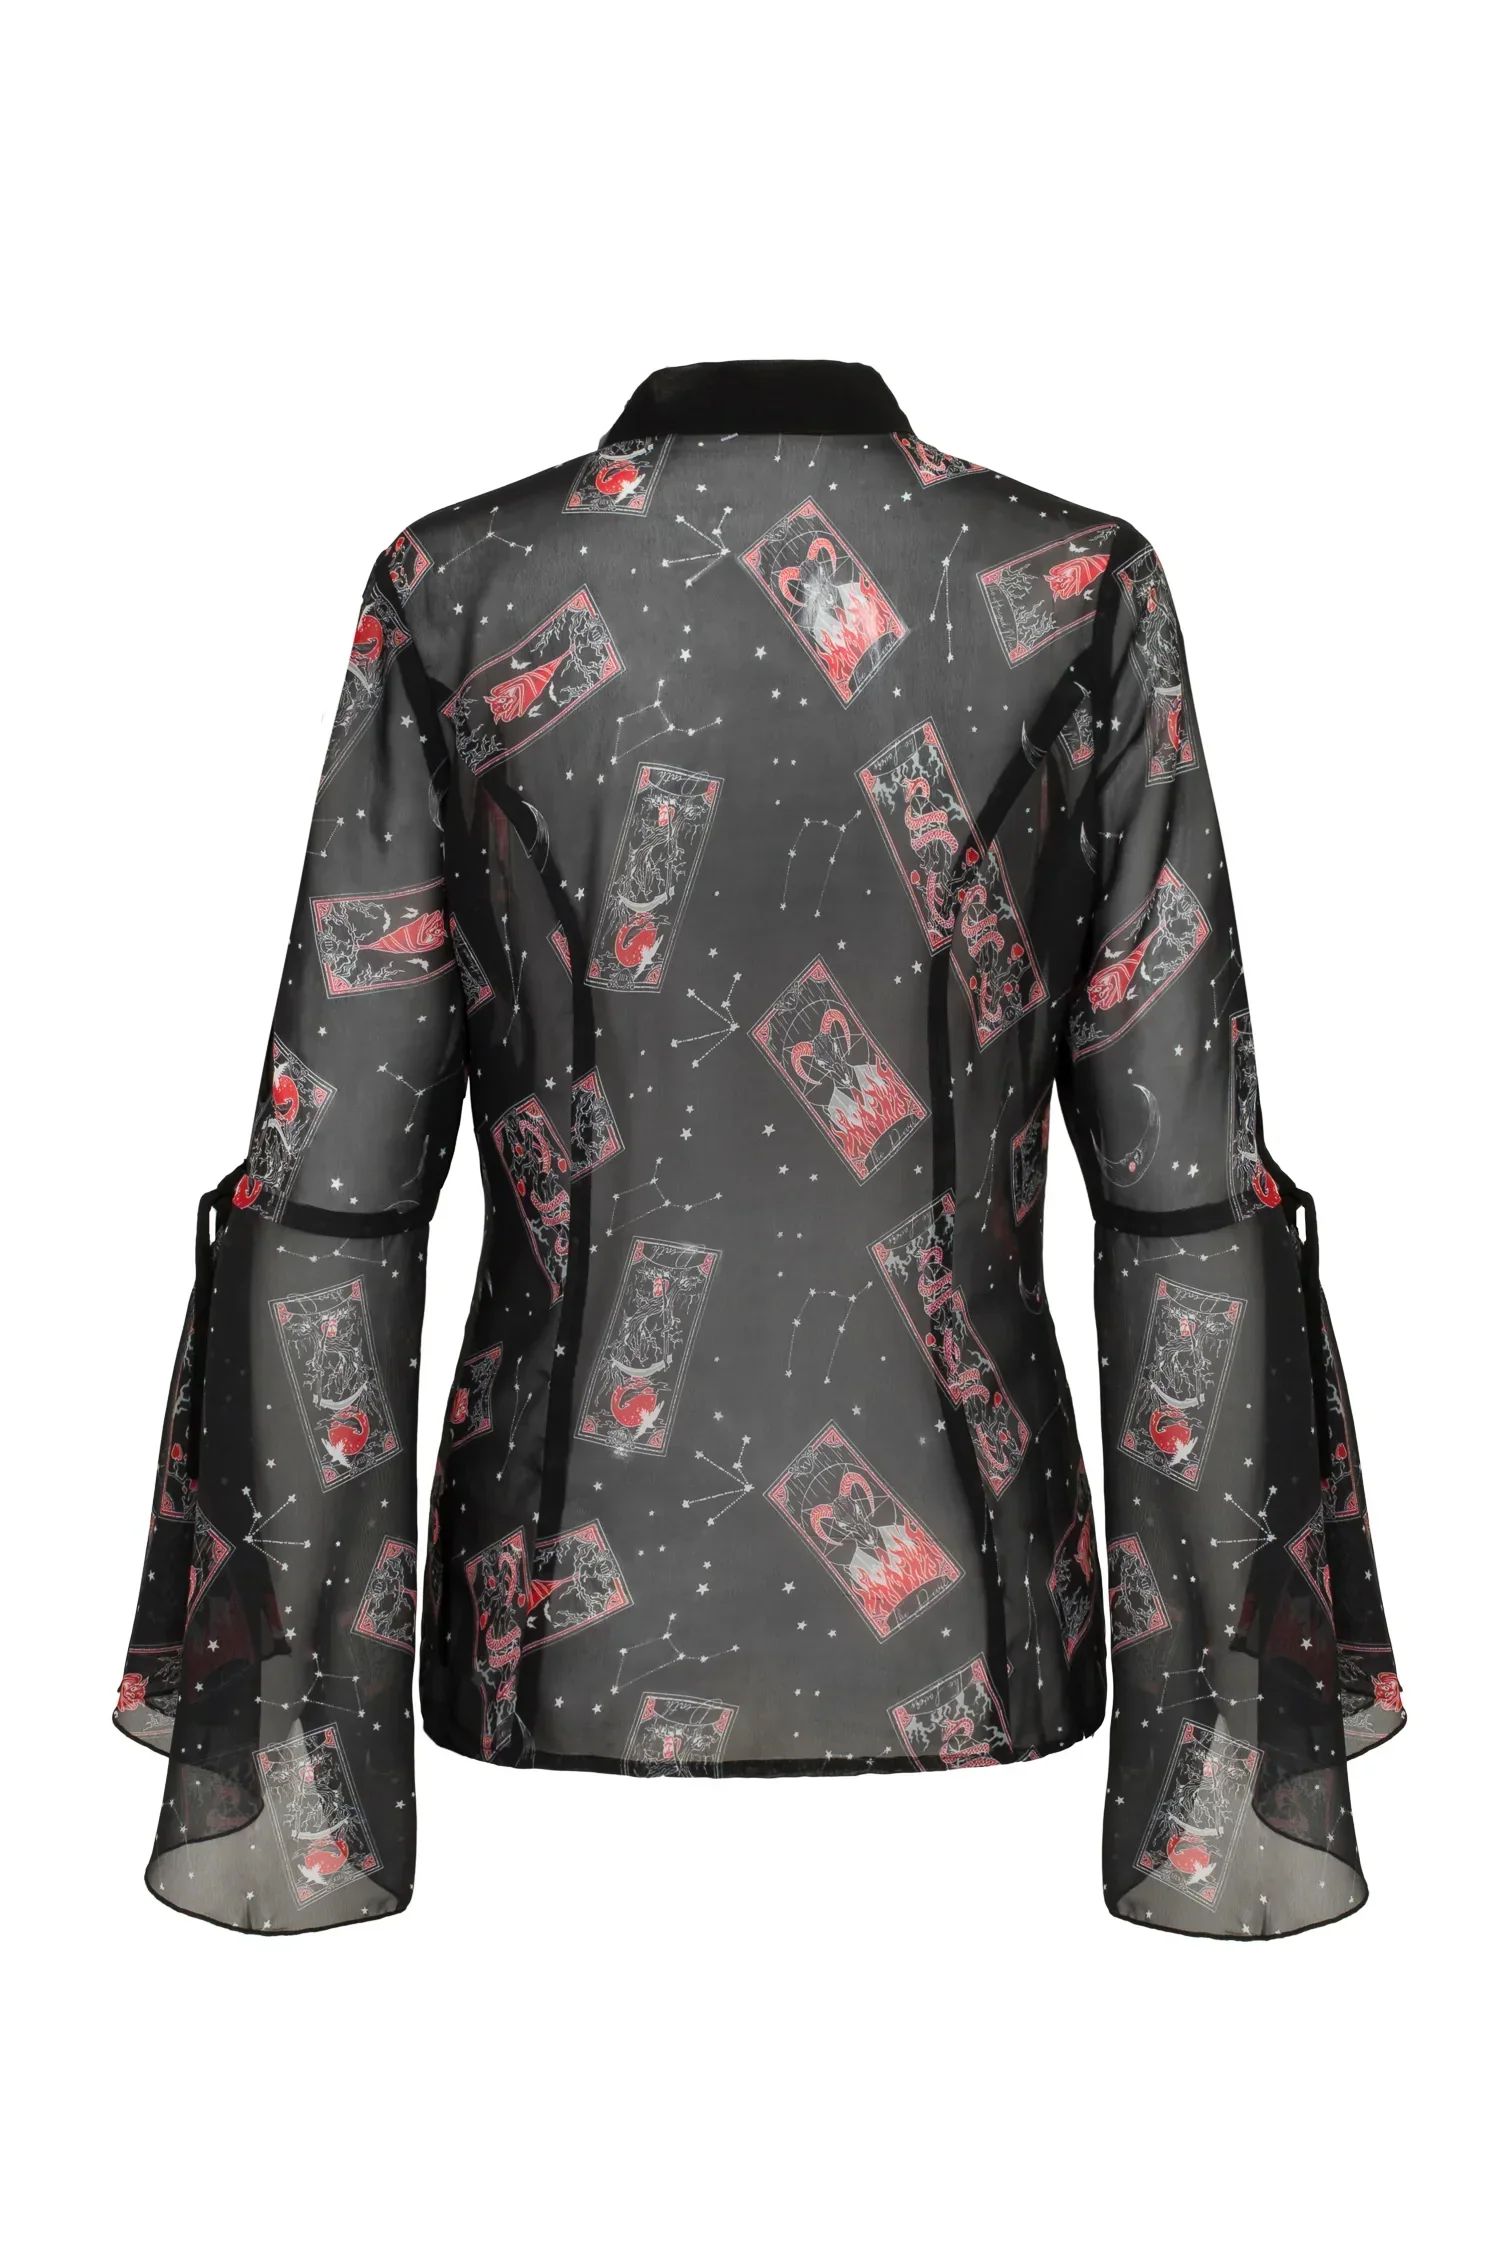 PS60252bbbbbbbb-chemisier-blouse-robe-gothique-rock-hell-bunny-duality